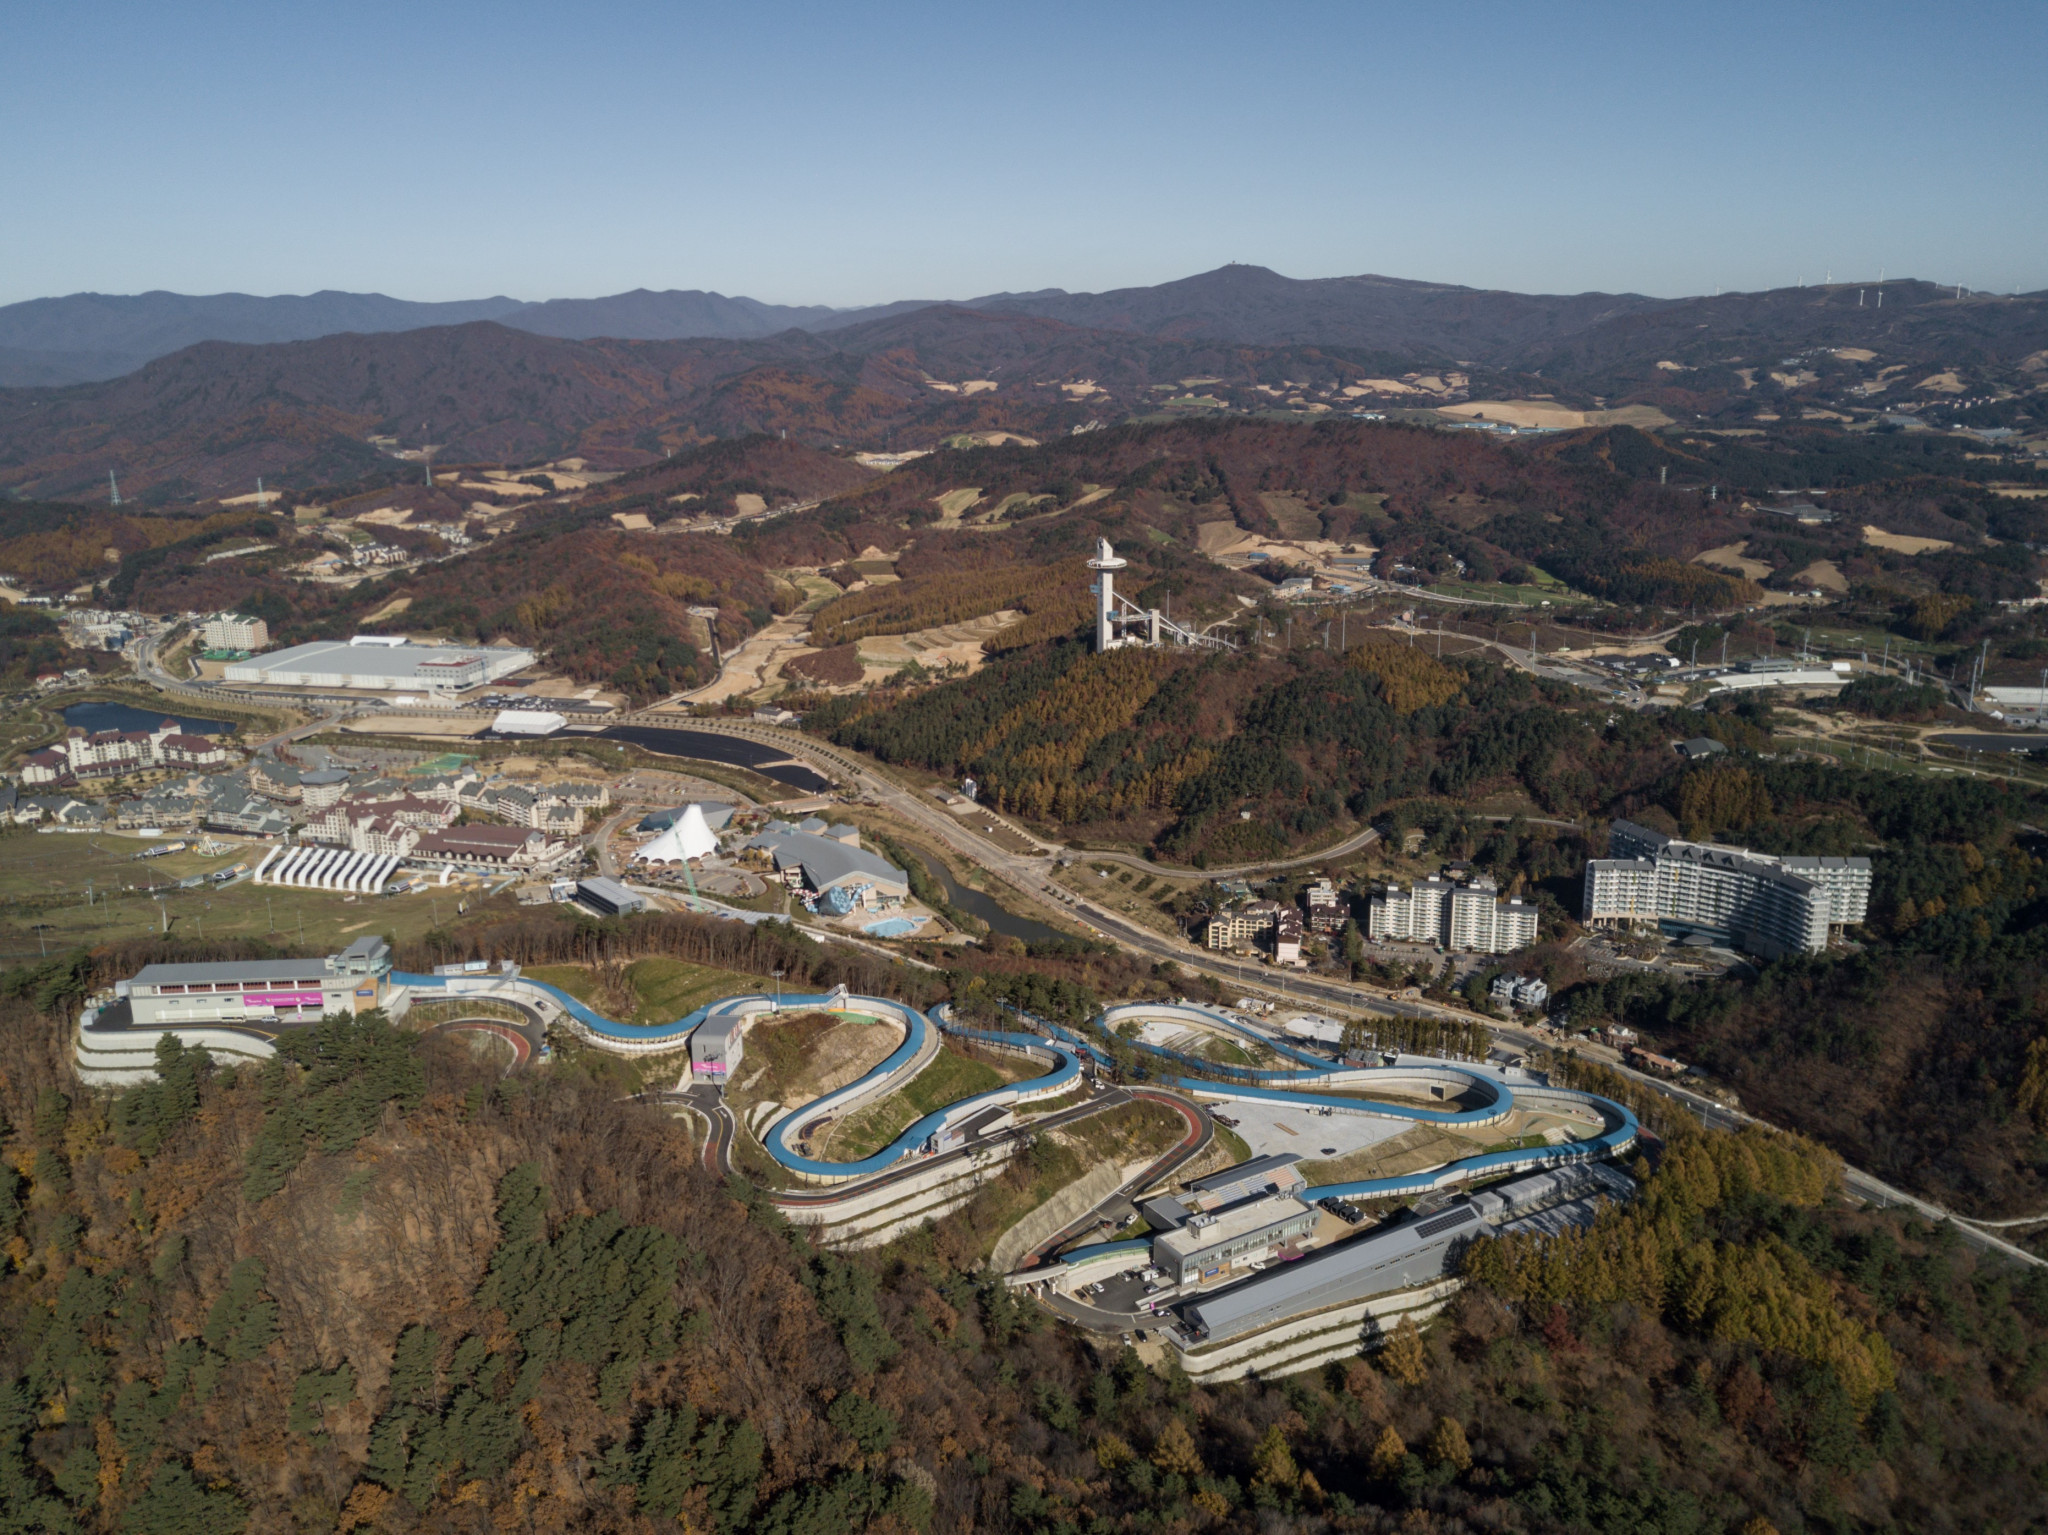 South Korea offer special visa-free entry period to Chinese visitors for Pyeongchang 2018